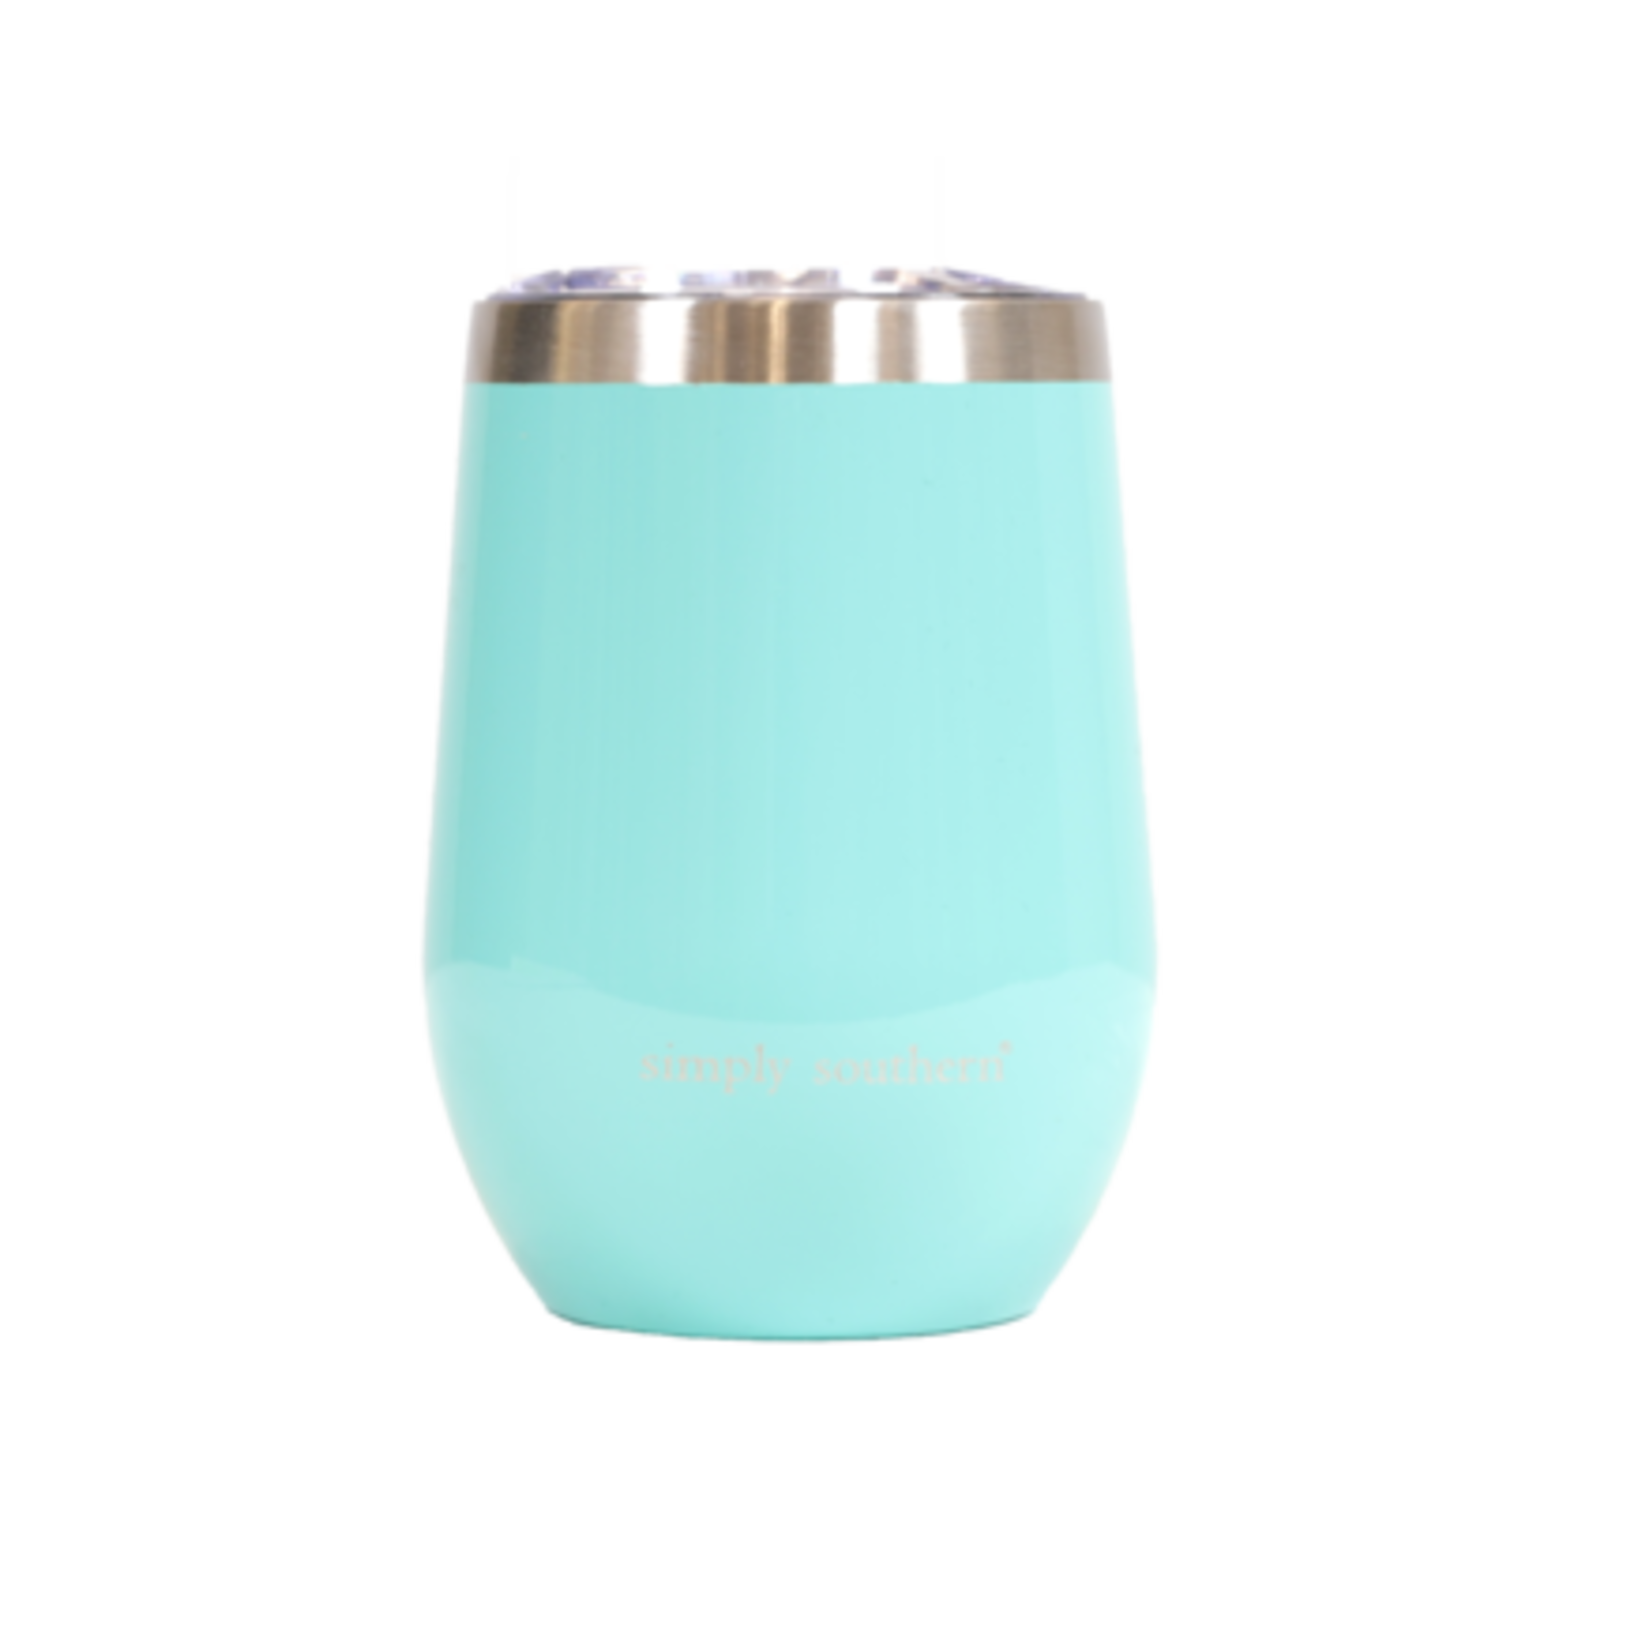 Simply Southern SS Tumbler Solid